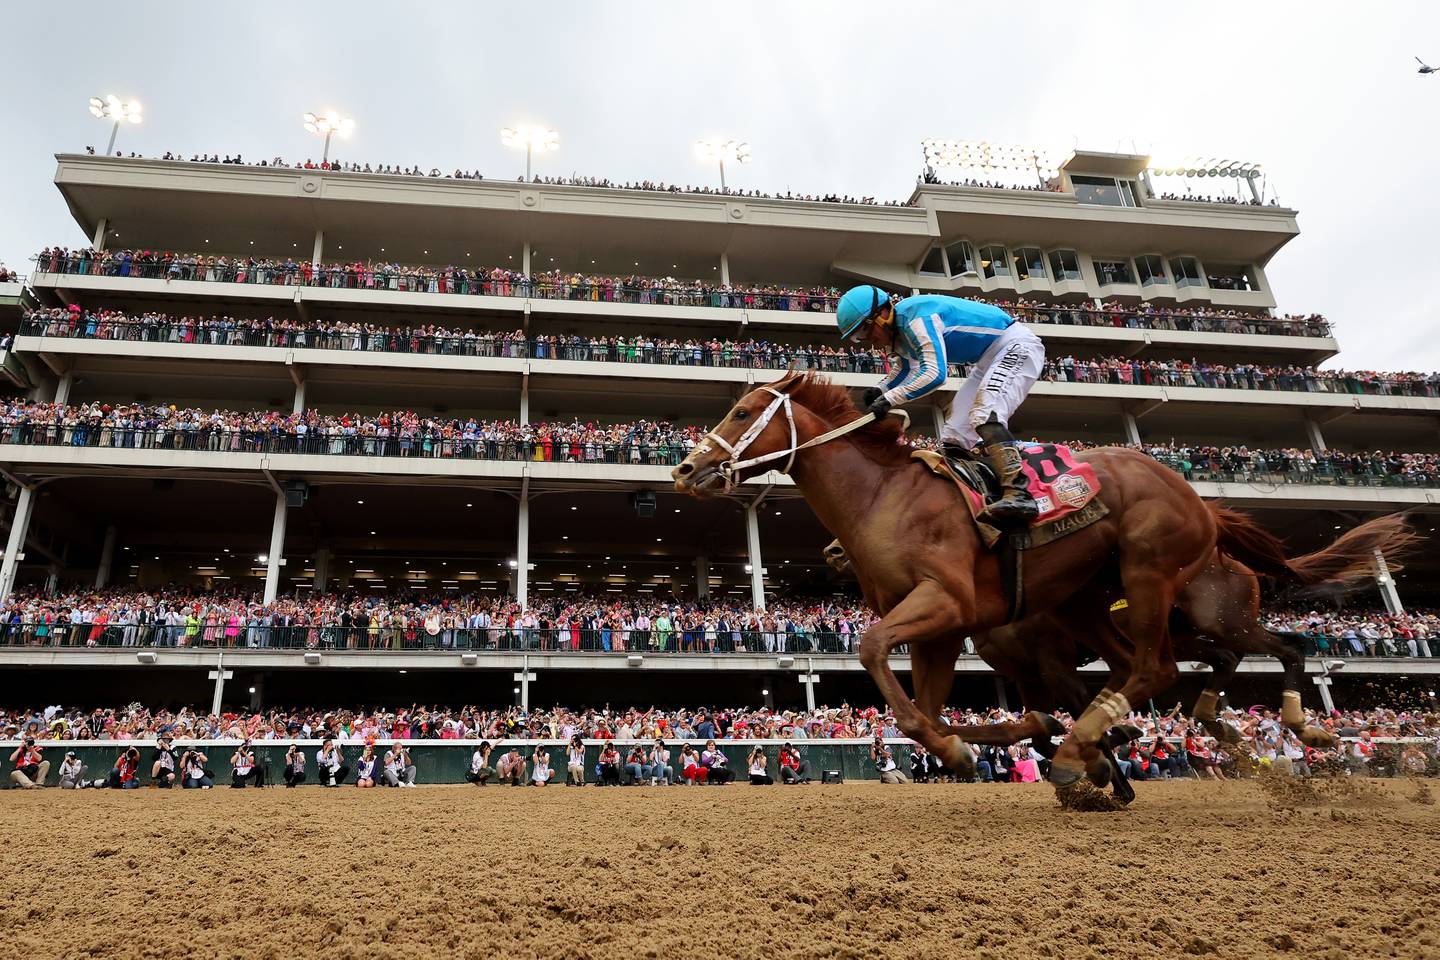 Mage, ridden by jockey Javier Castellano, crosses the finish line to win the 149th running of the Kentucky Derby.